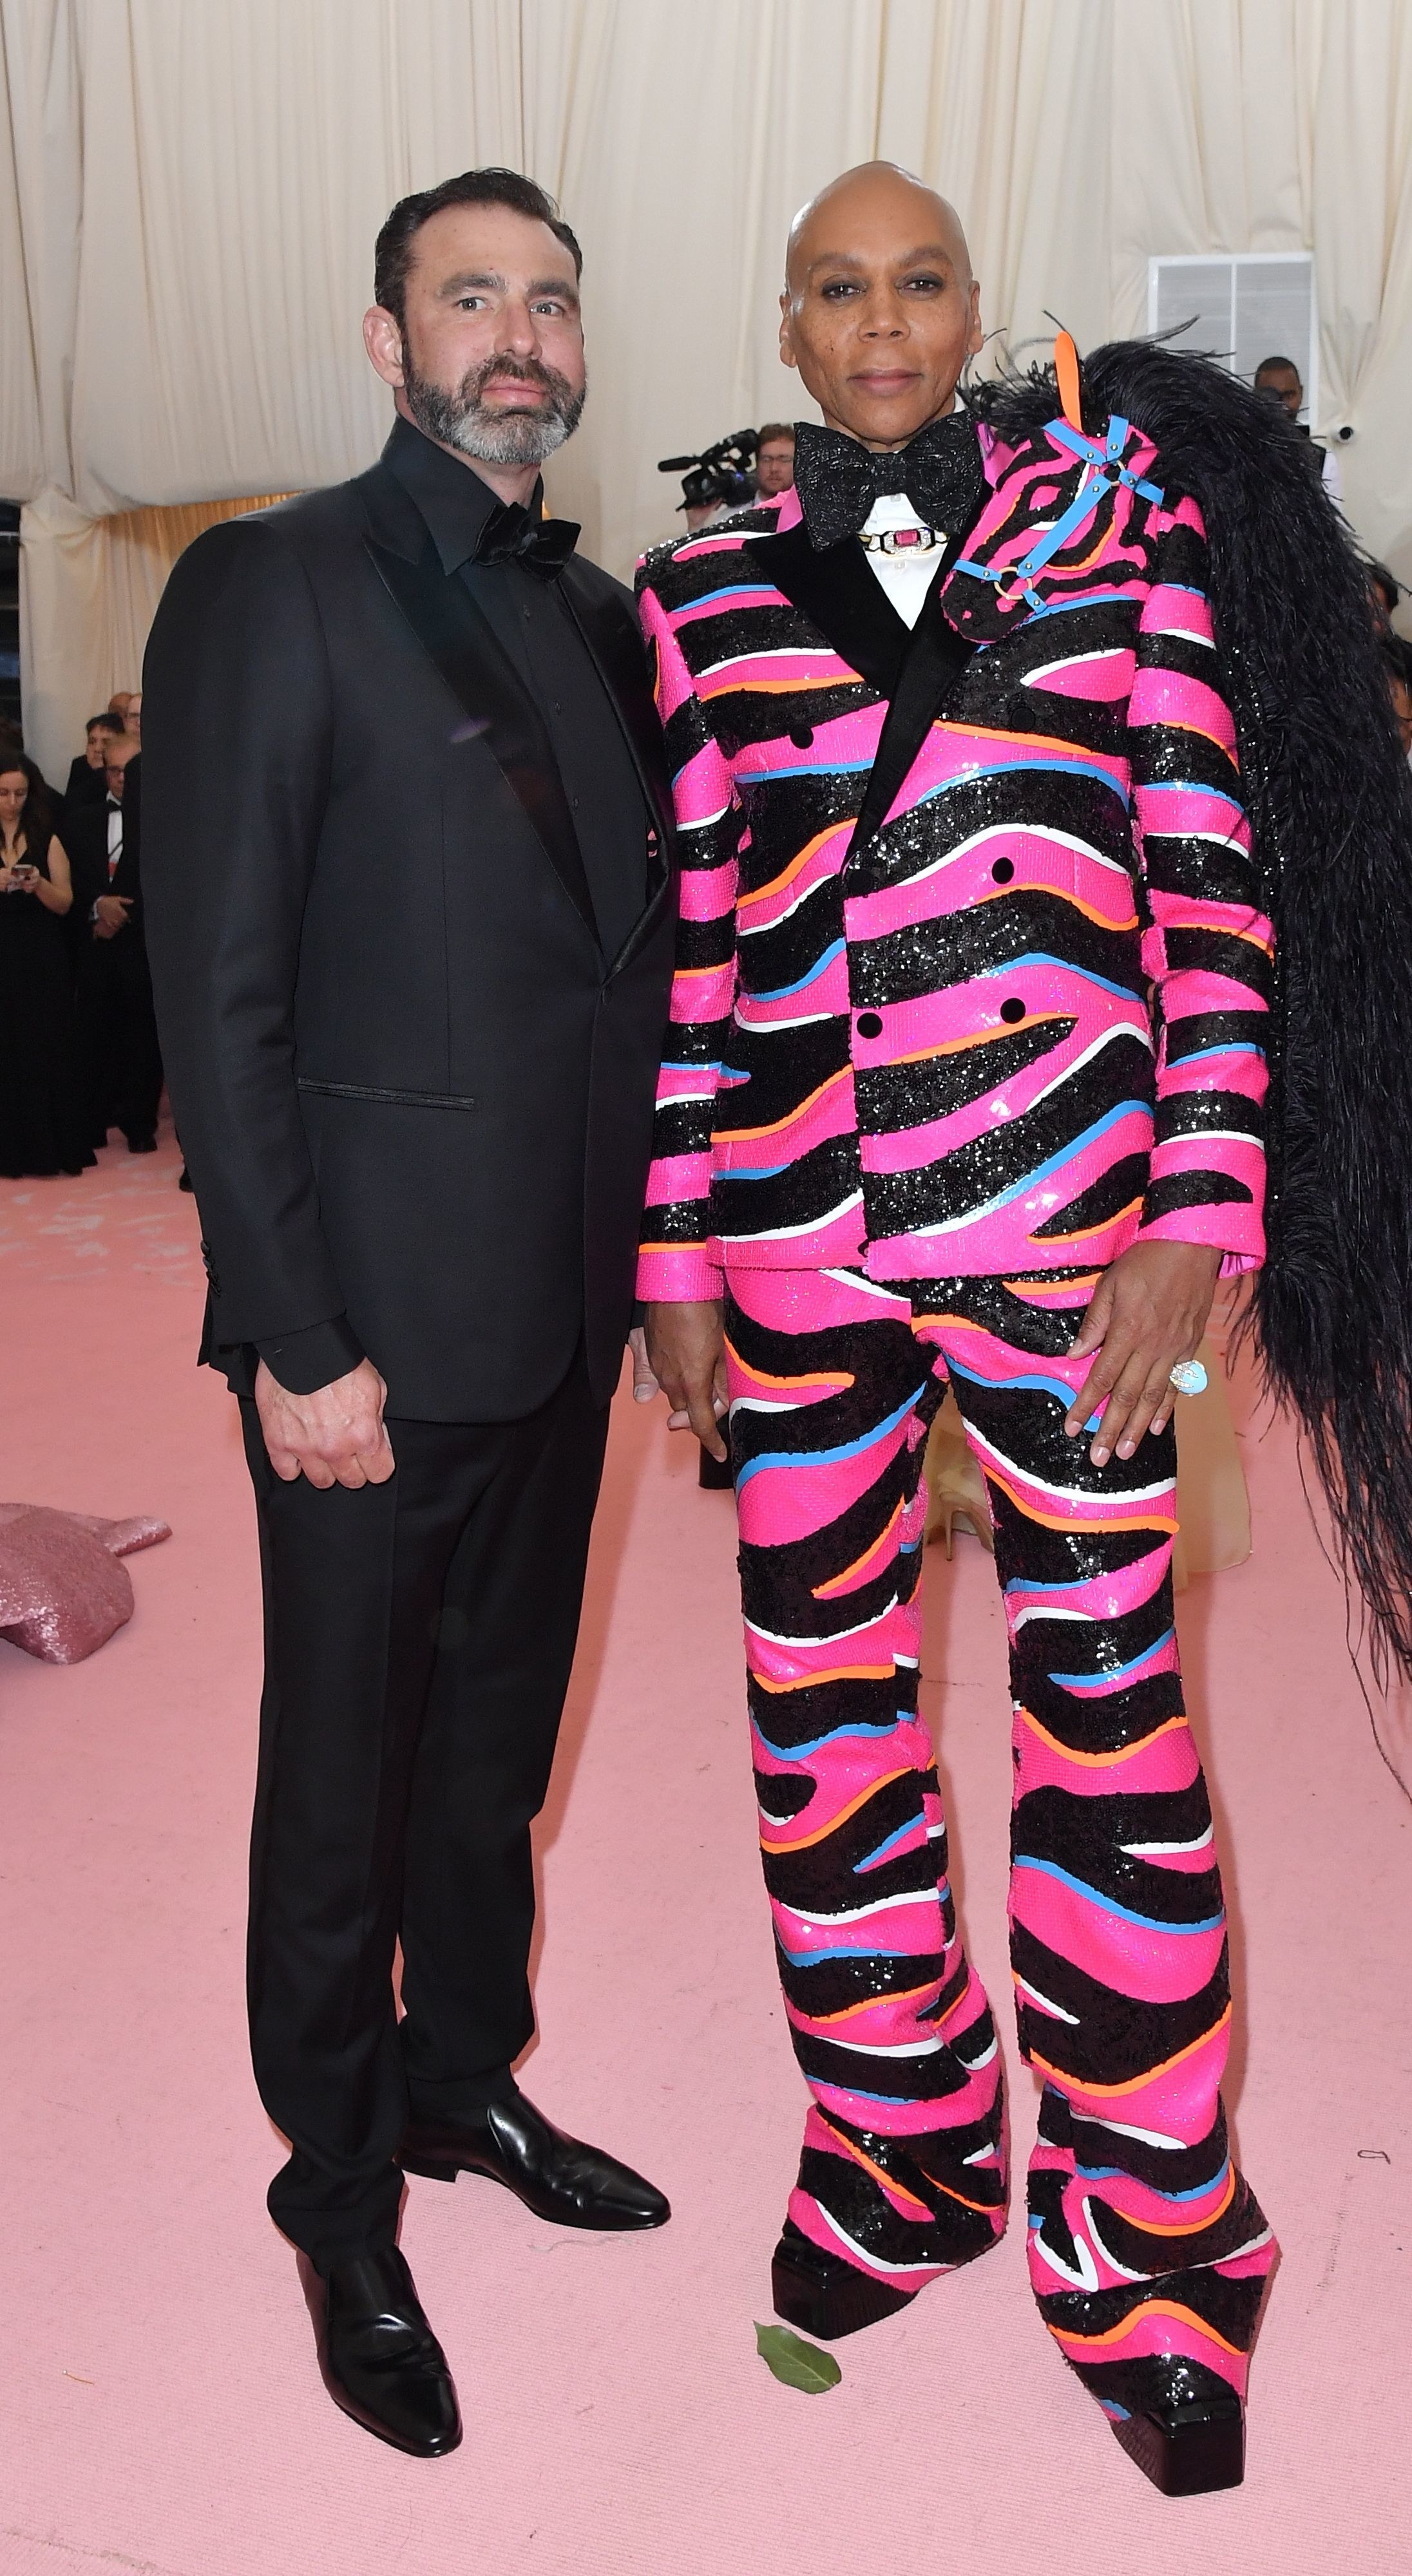 Georges and RuPaul at an event